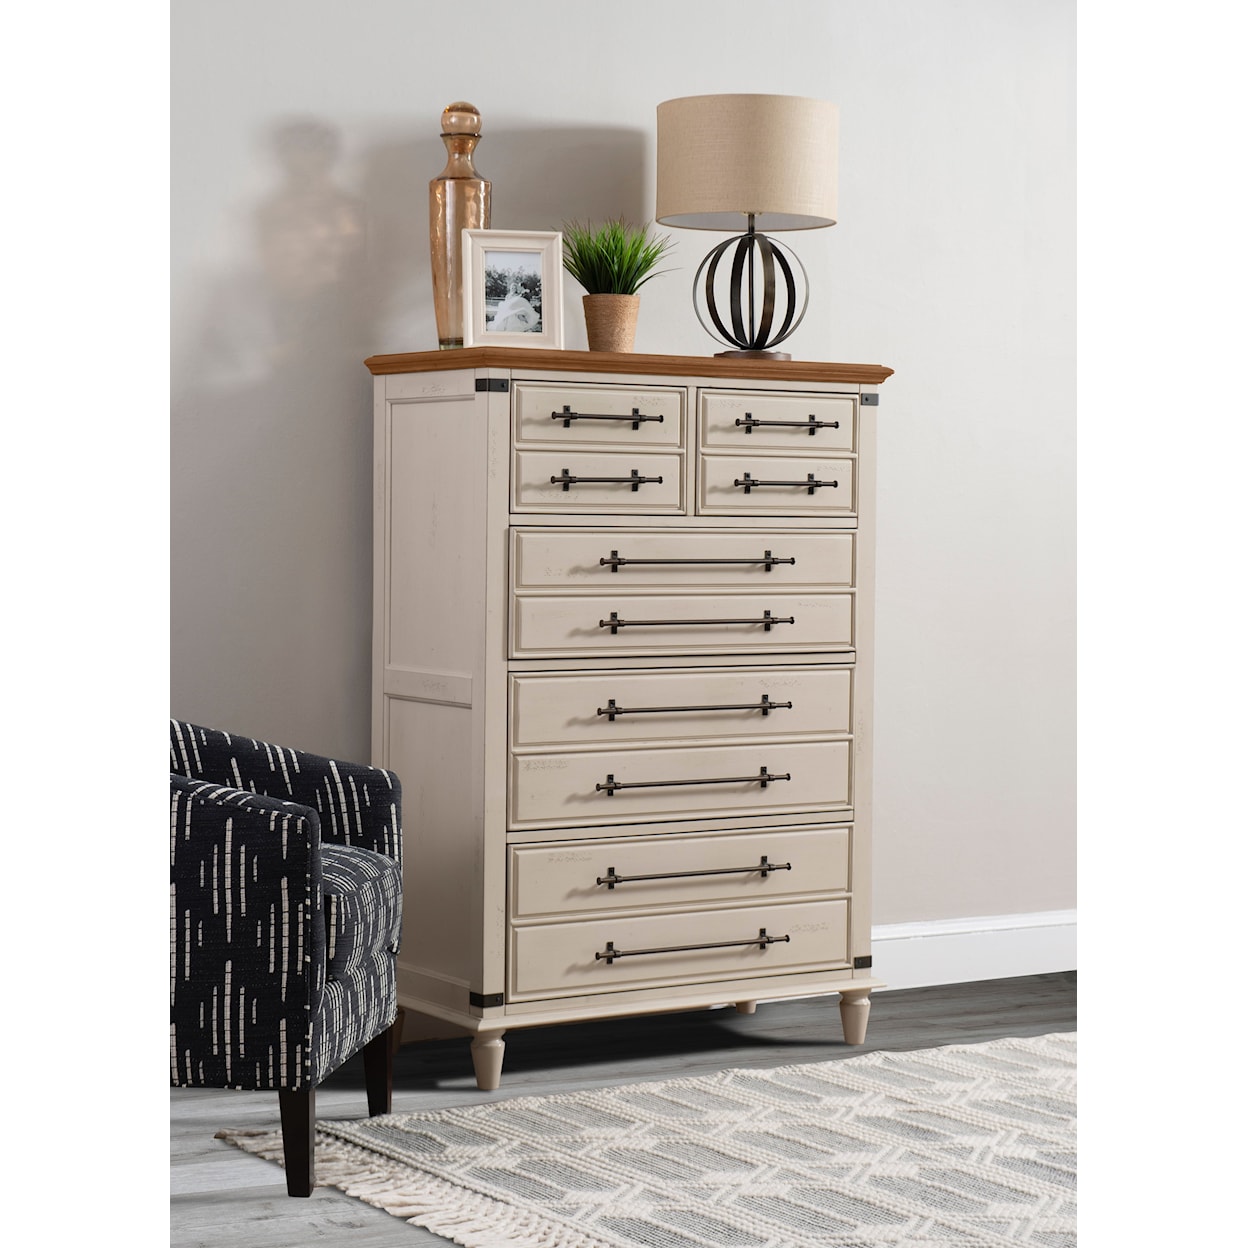 Carolina Dinette Farmhouse Chic 5 Drawer Chest in Bourbon & Biscuit